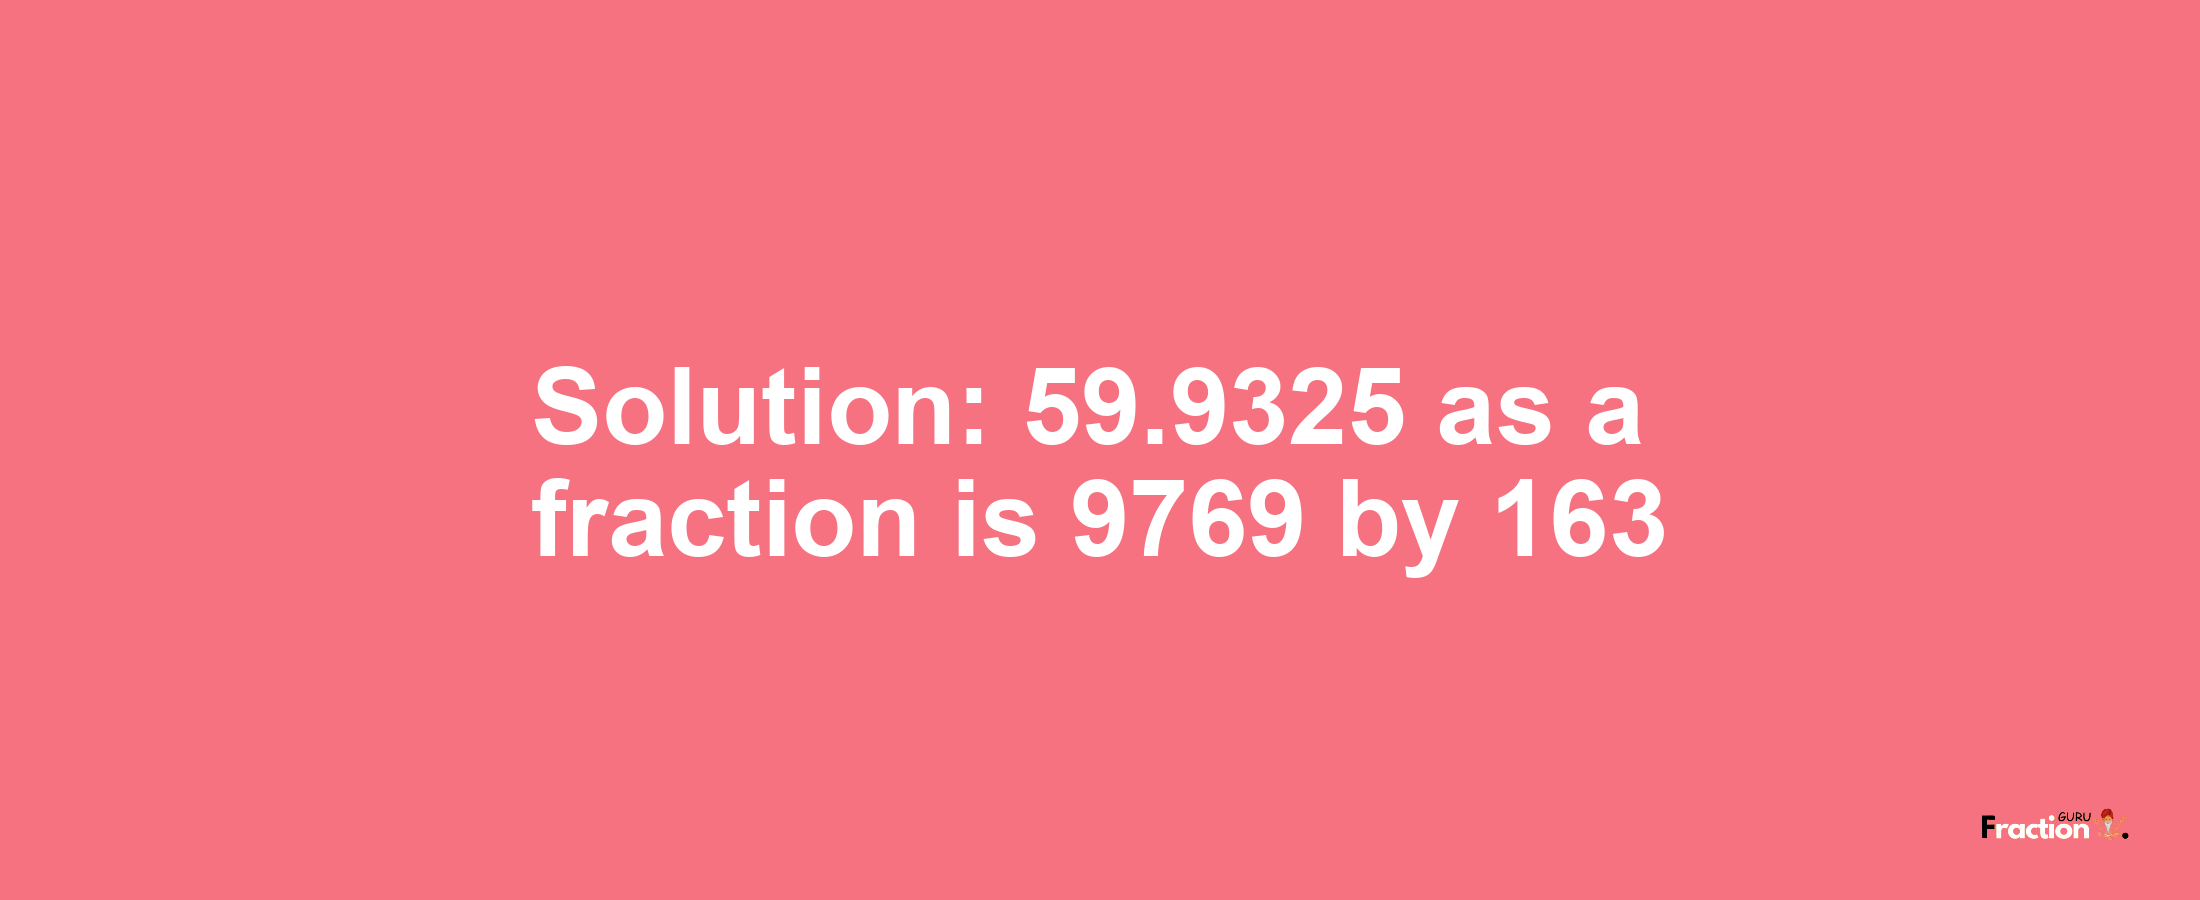 Solution:59.9325 as a fraction is 9769/163